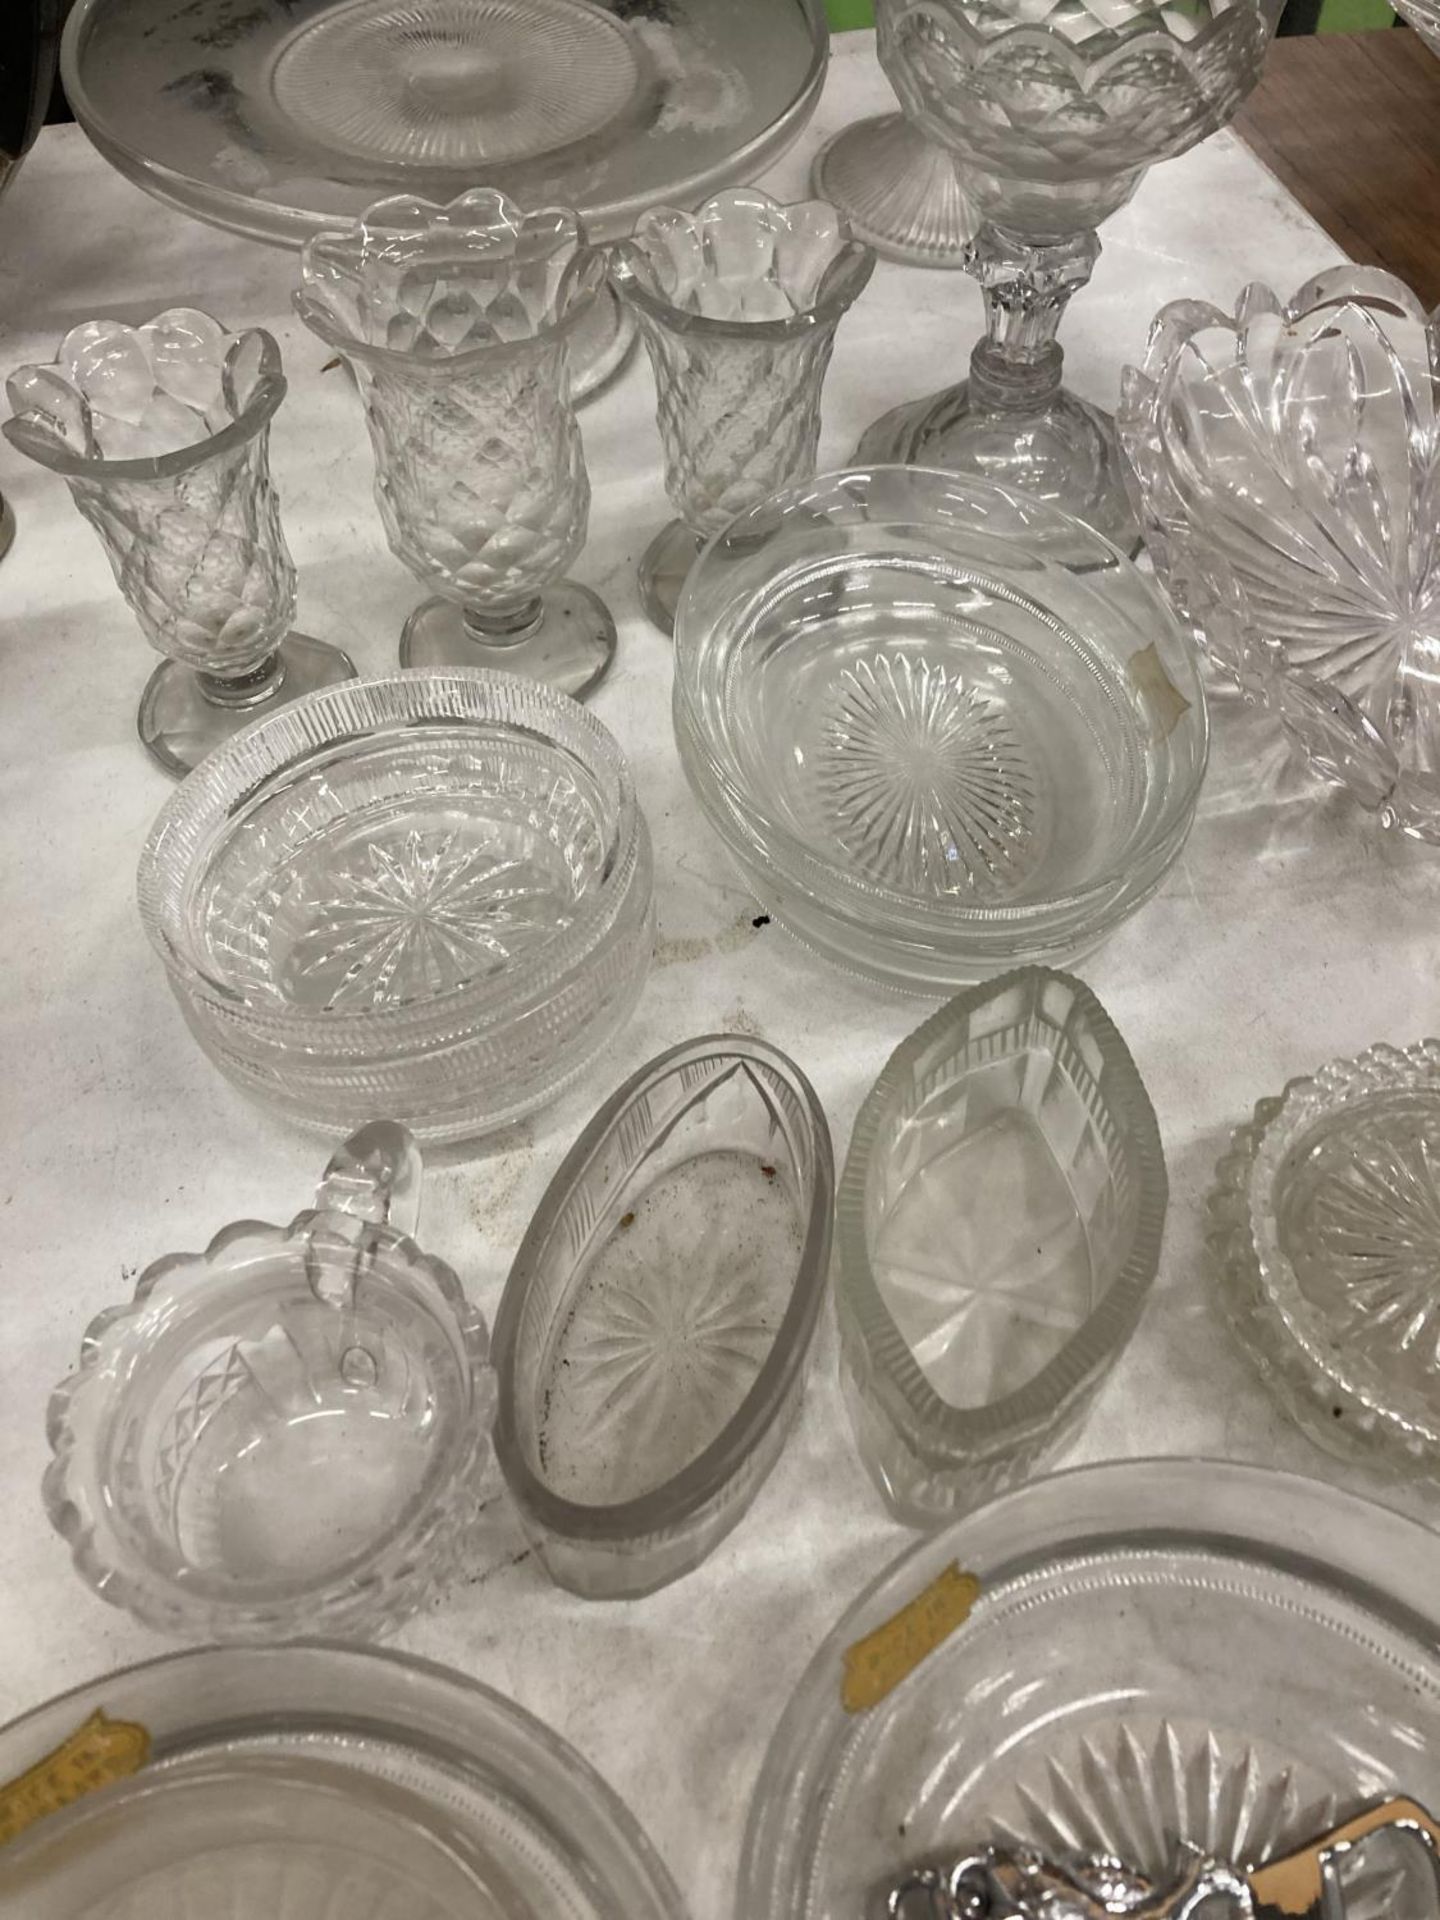 A QUANTITY OF GLASSWARE TO INCLUDE CAKE STANDS, VASES, BOWLS, DISHES, ETC - Image 3 of 4